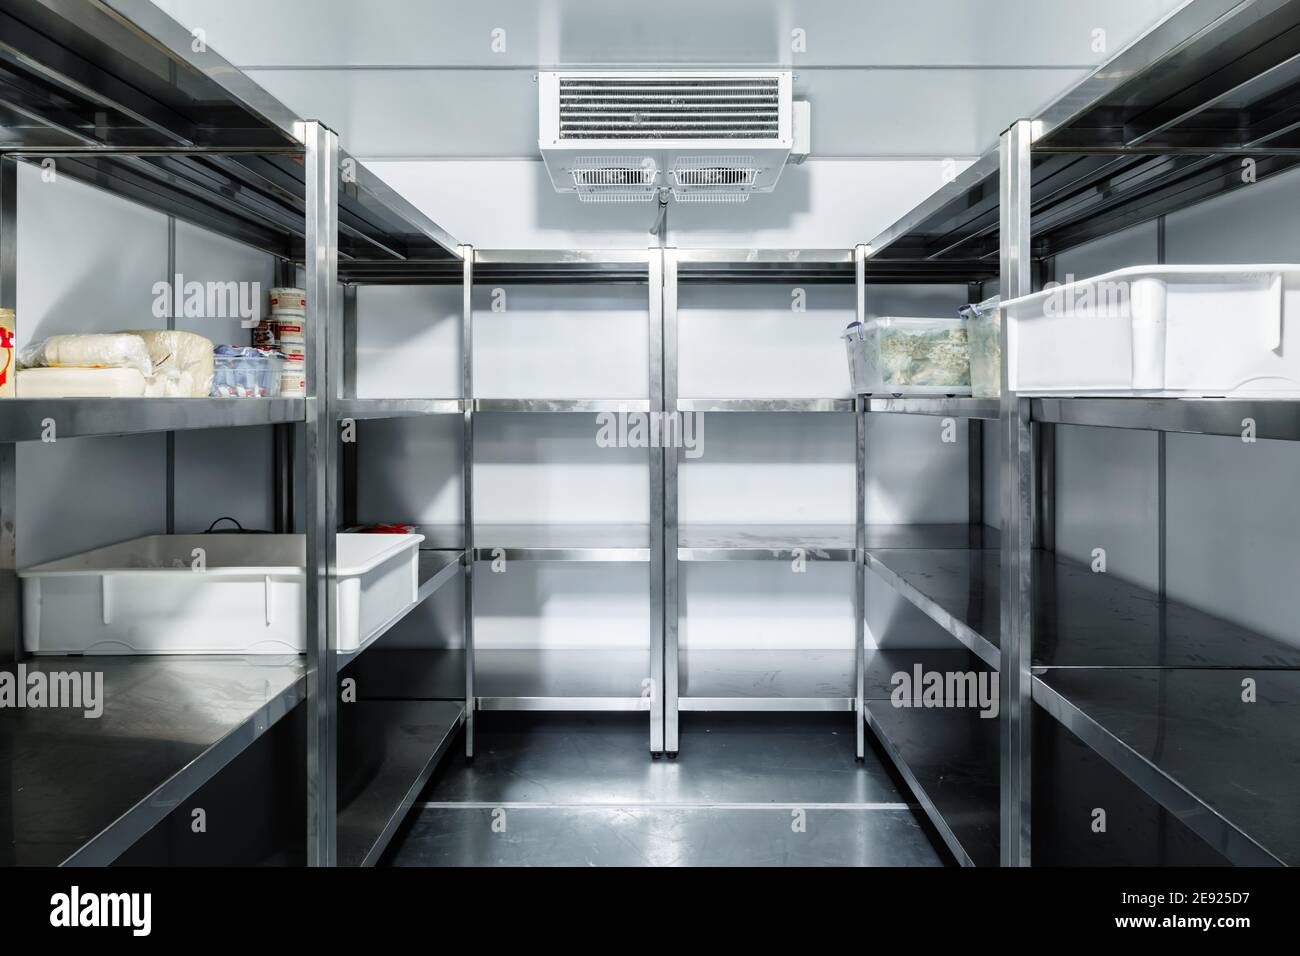 Refrigerator chamber with steel shelves in a restaurant Stock Photo